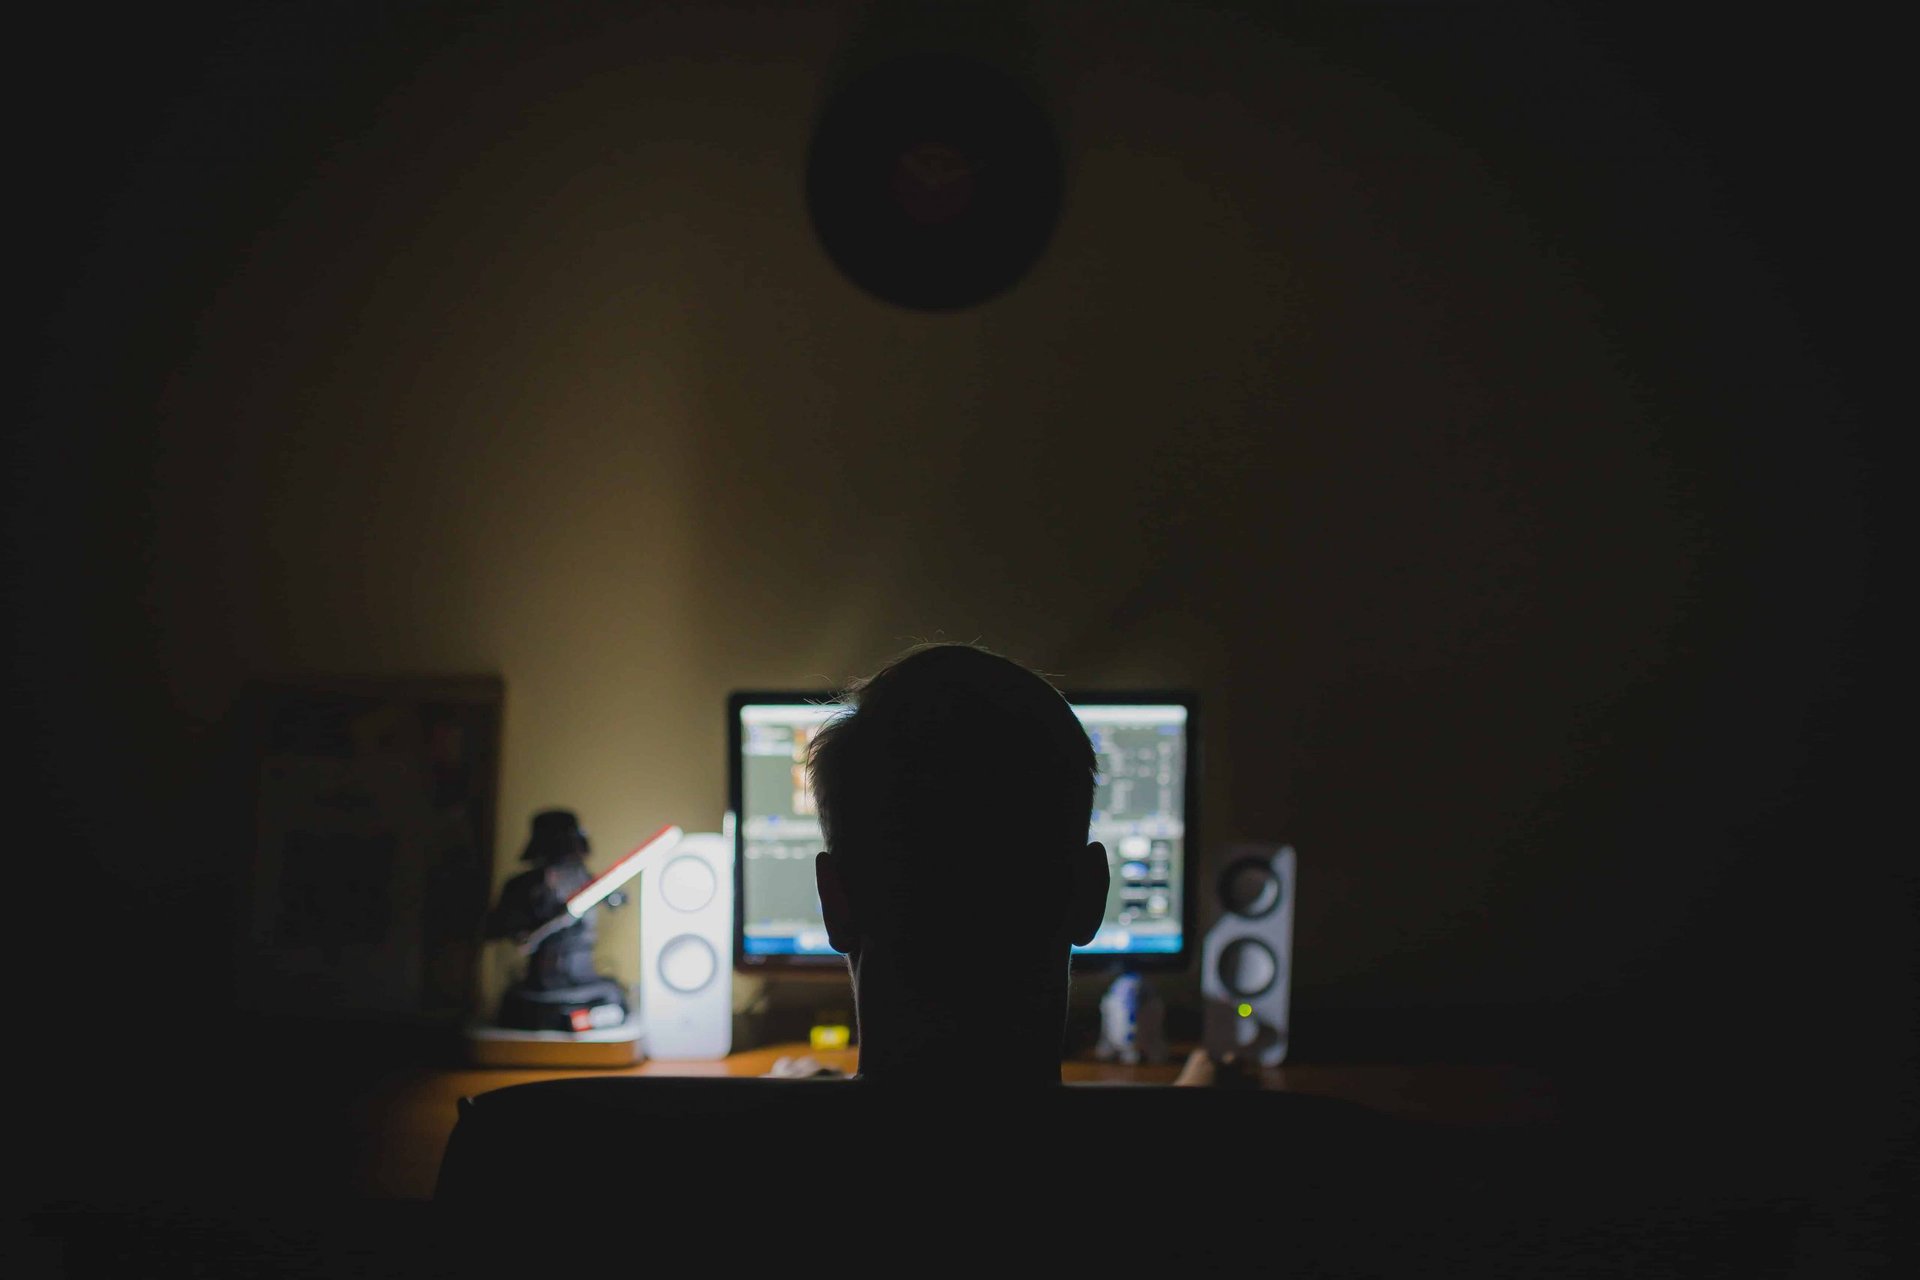 A man sitting in front of a computer, unable to locate adult sites' owners for FBI's 'major hack' warning.